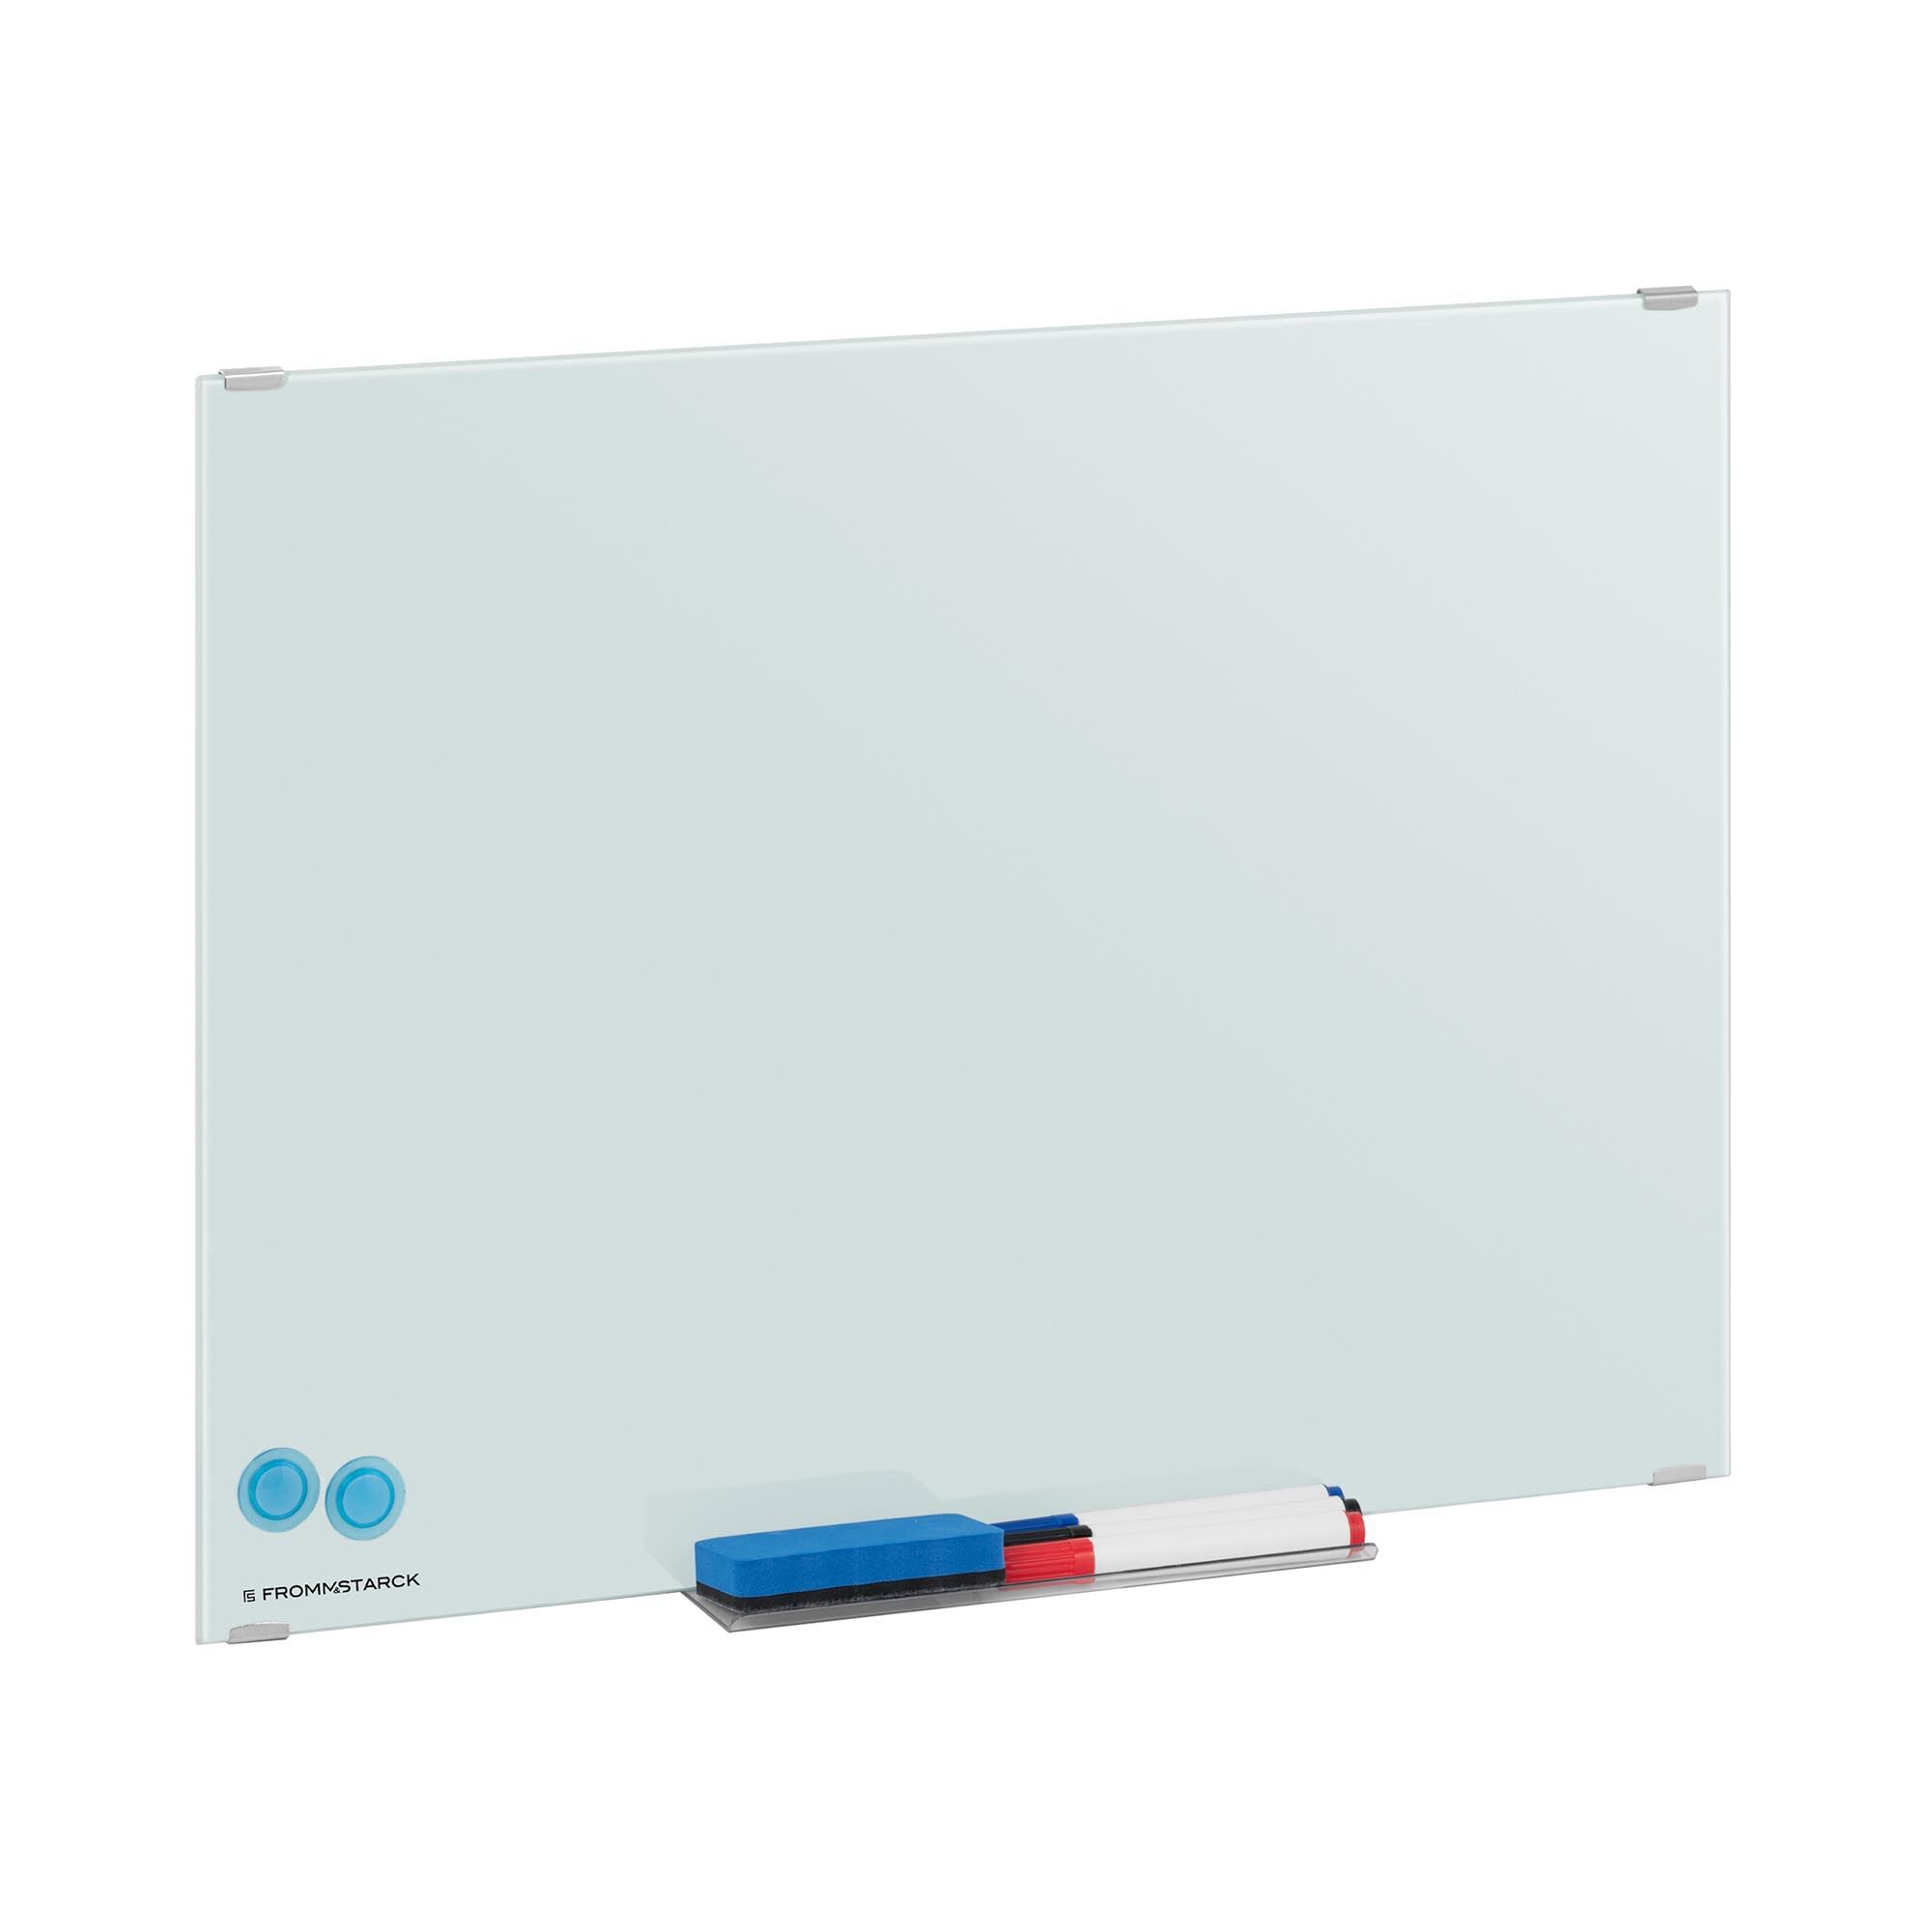 Fromm & Starck Whiteboard - 60 x 45 x 0.4 - magnetic